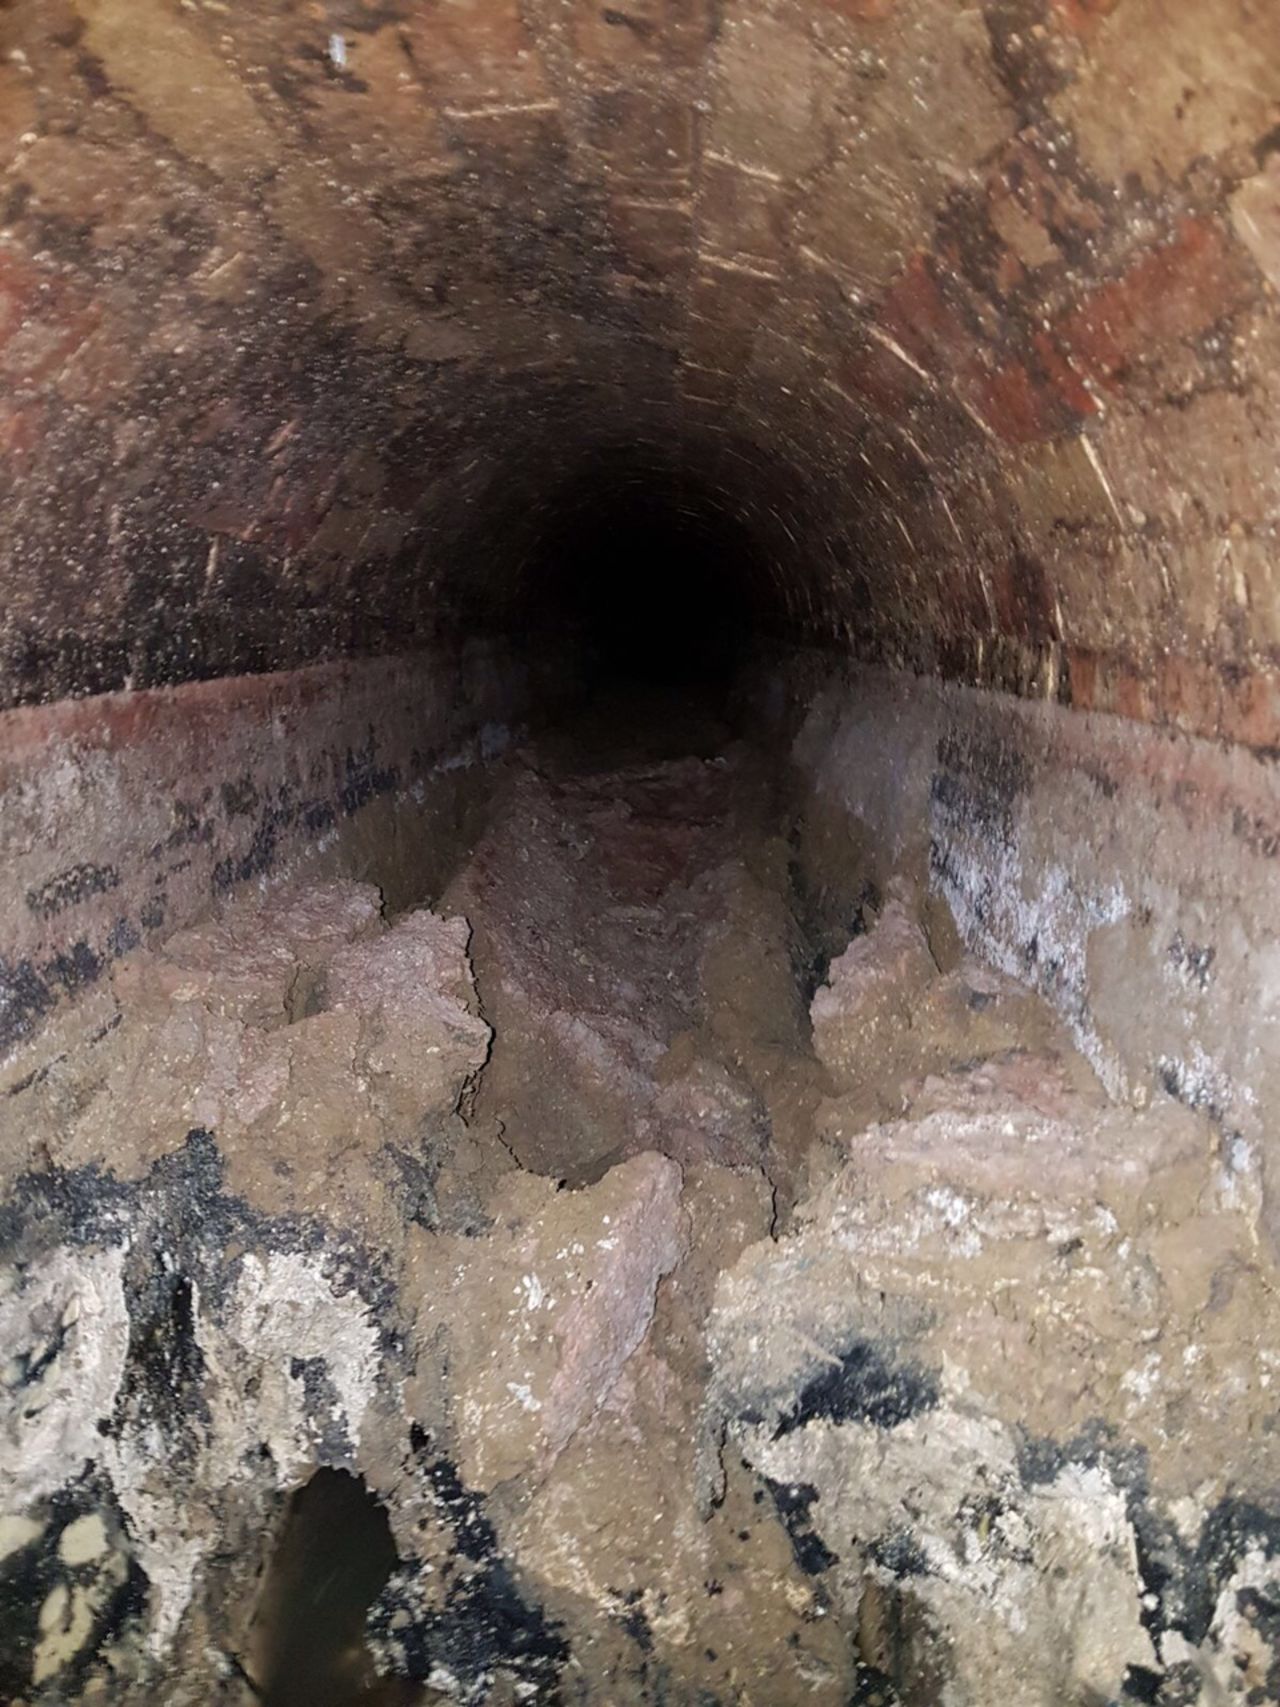 A giant "fatberg" was removed from these London sewers in late 2017. Most of it was converted to biofuel, but a few fragments will soon be exhibited at the Museum of London.